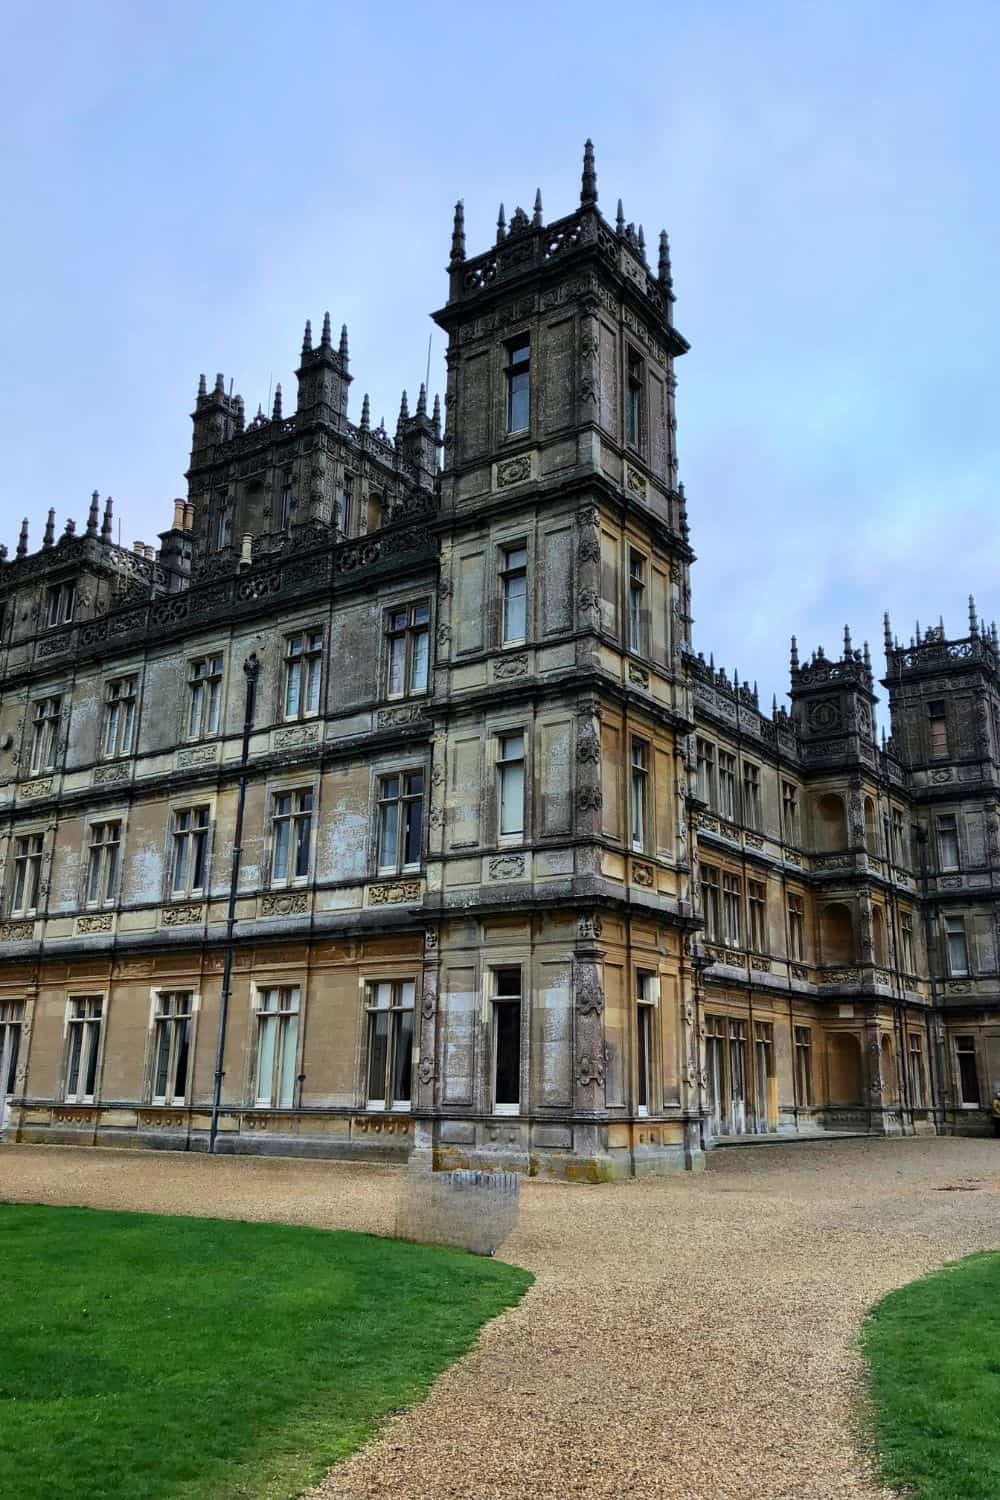 The exterior of Highclere Castle